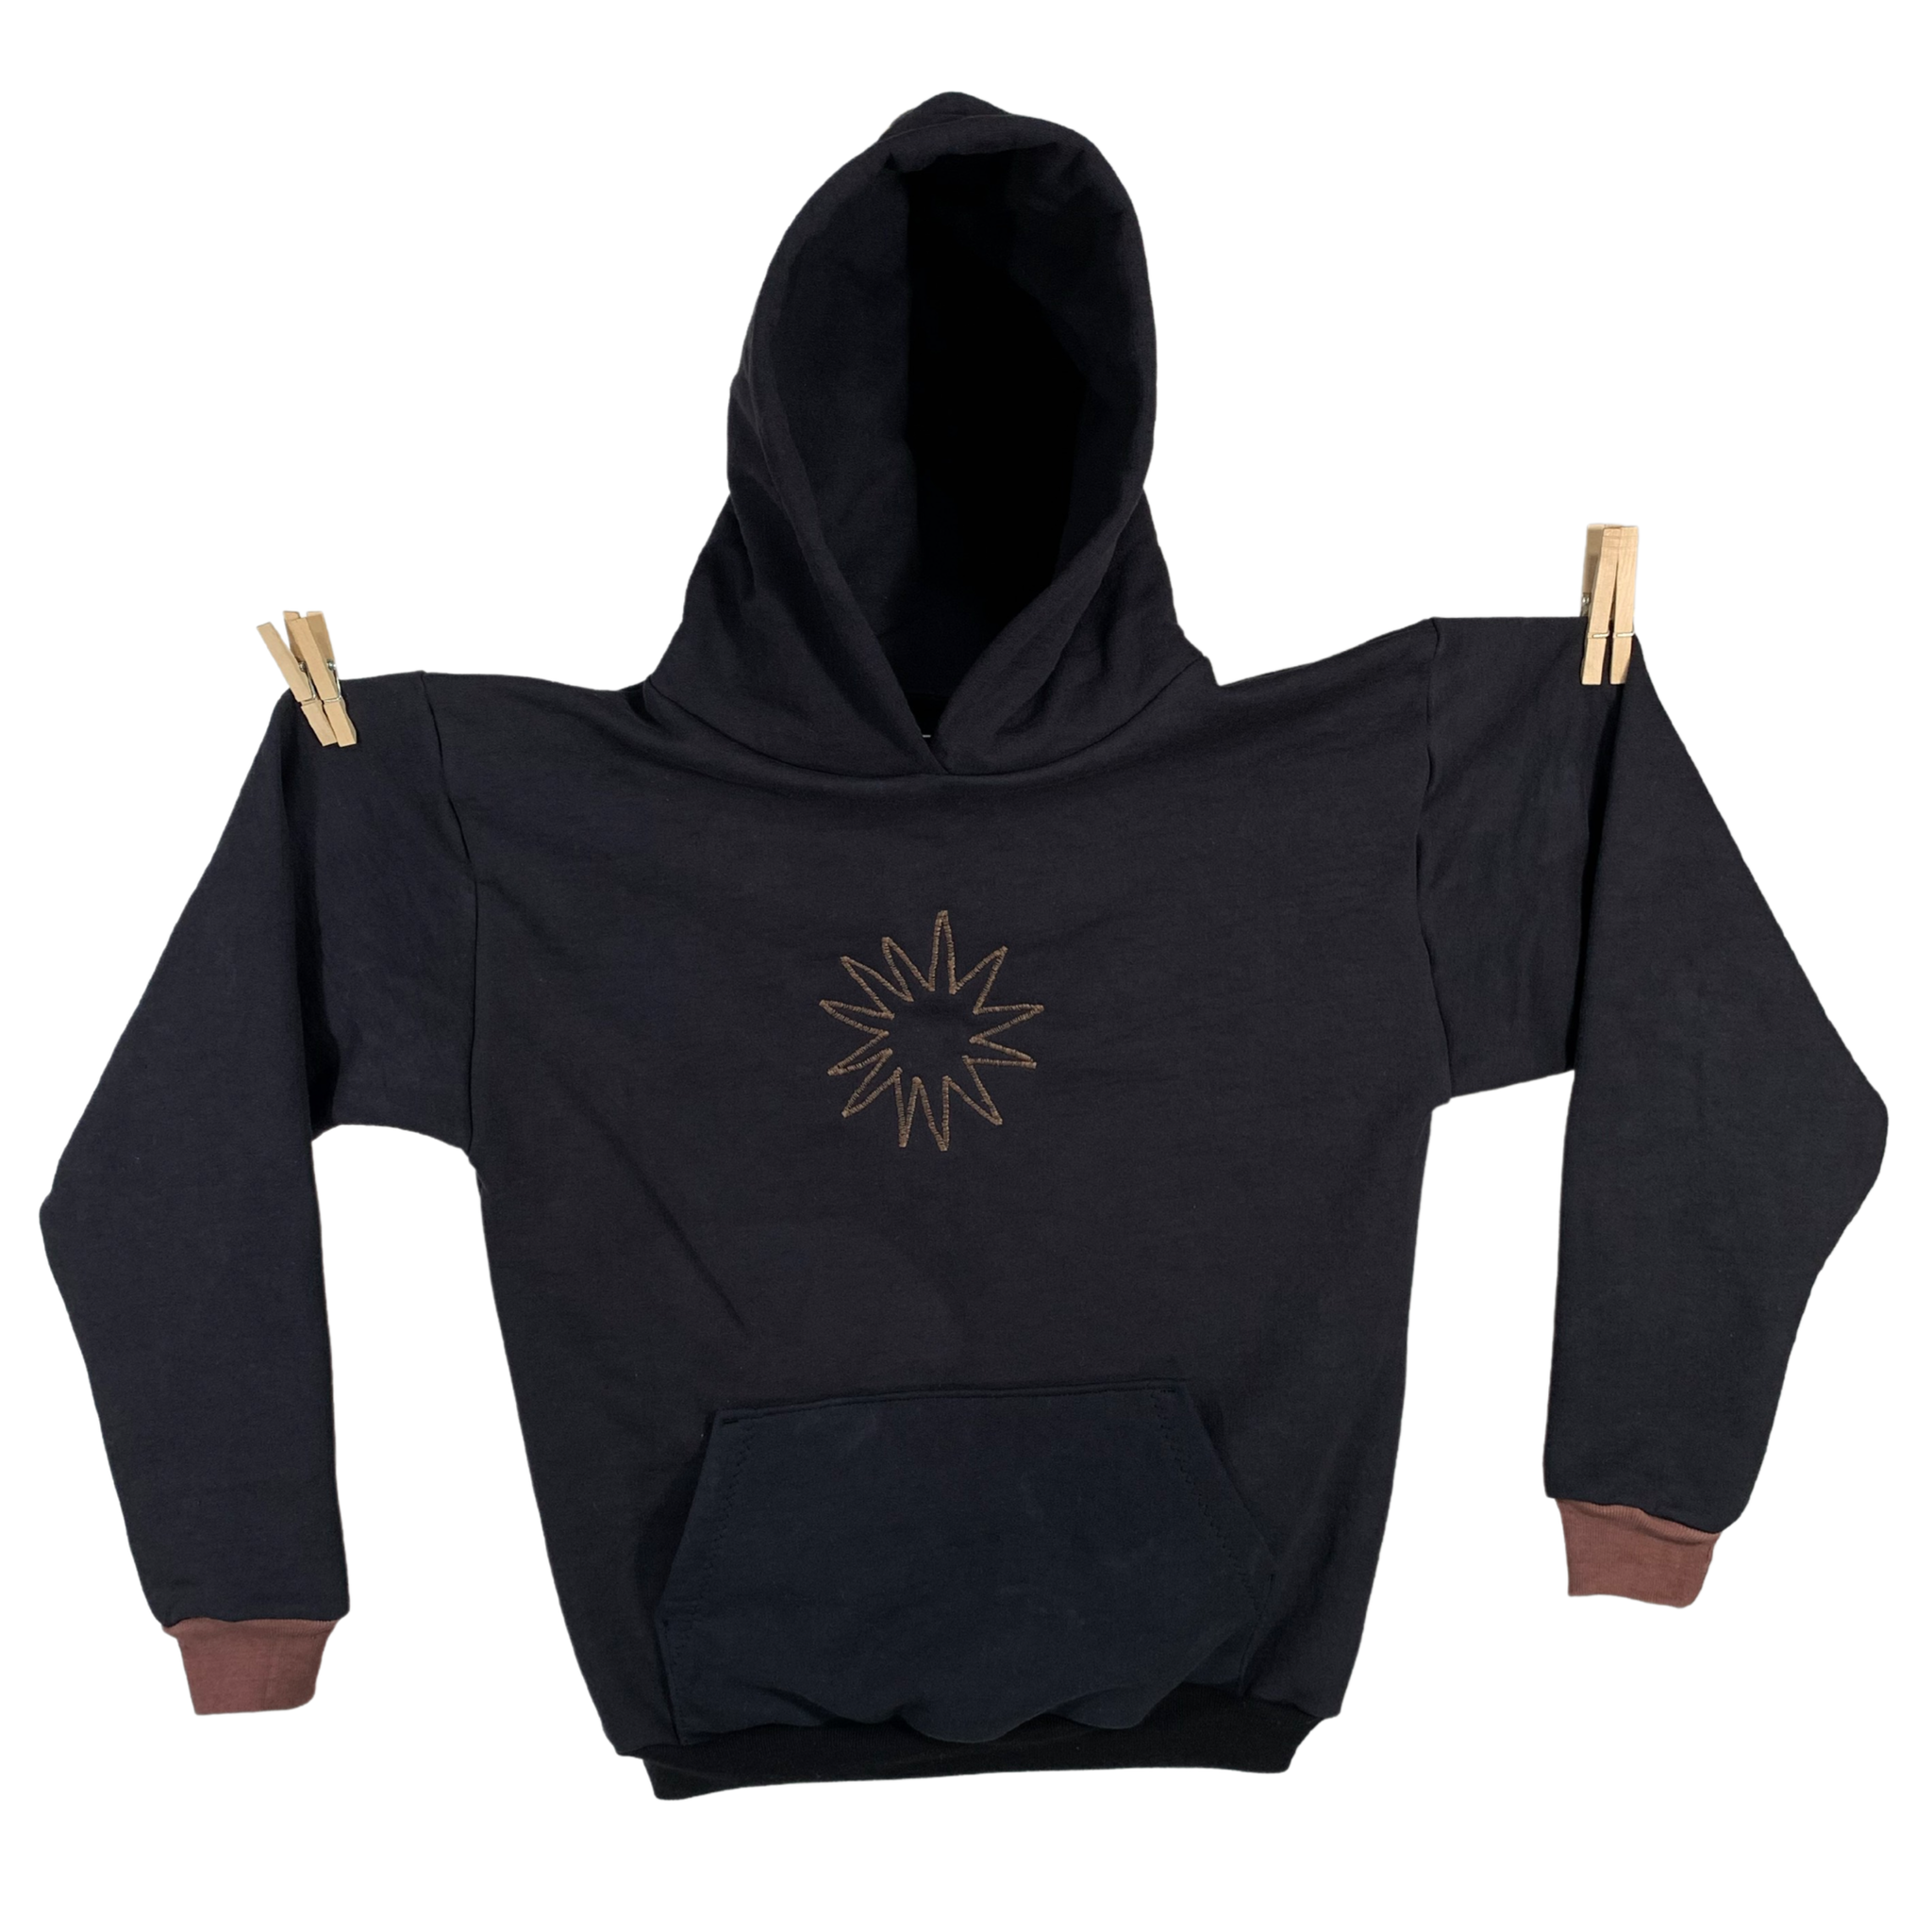 MADE TO ORDER XS-3X - organic cotton heavy hoodie